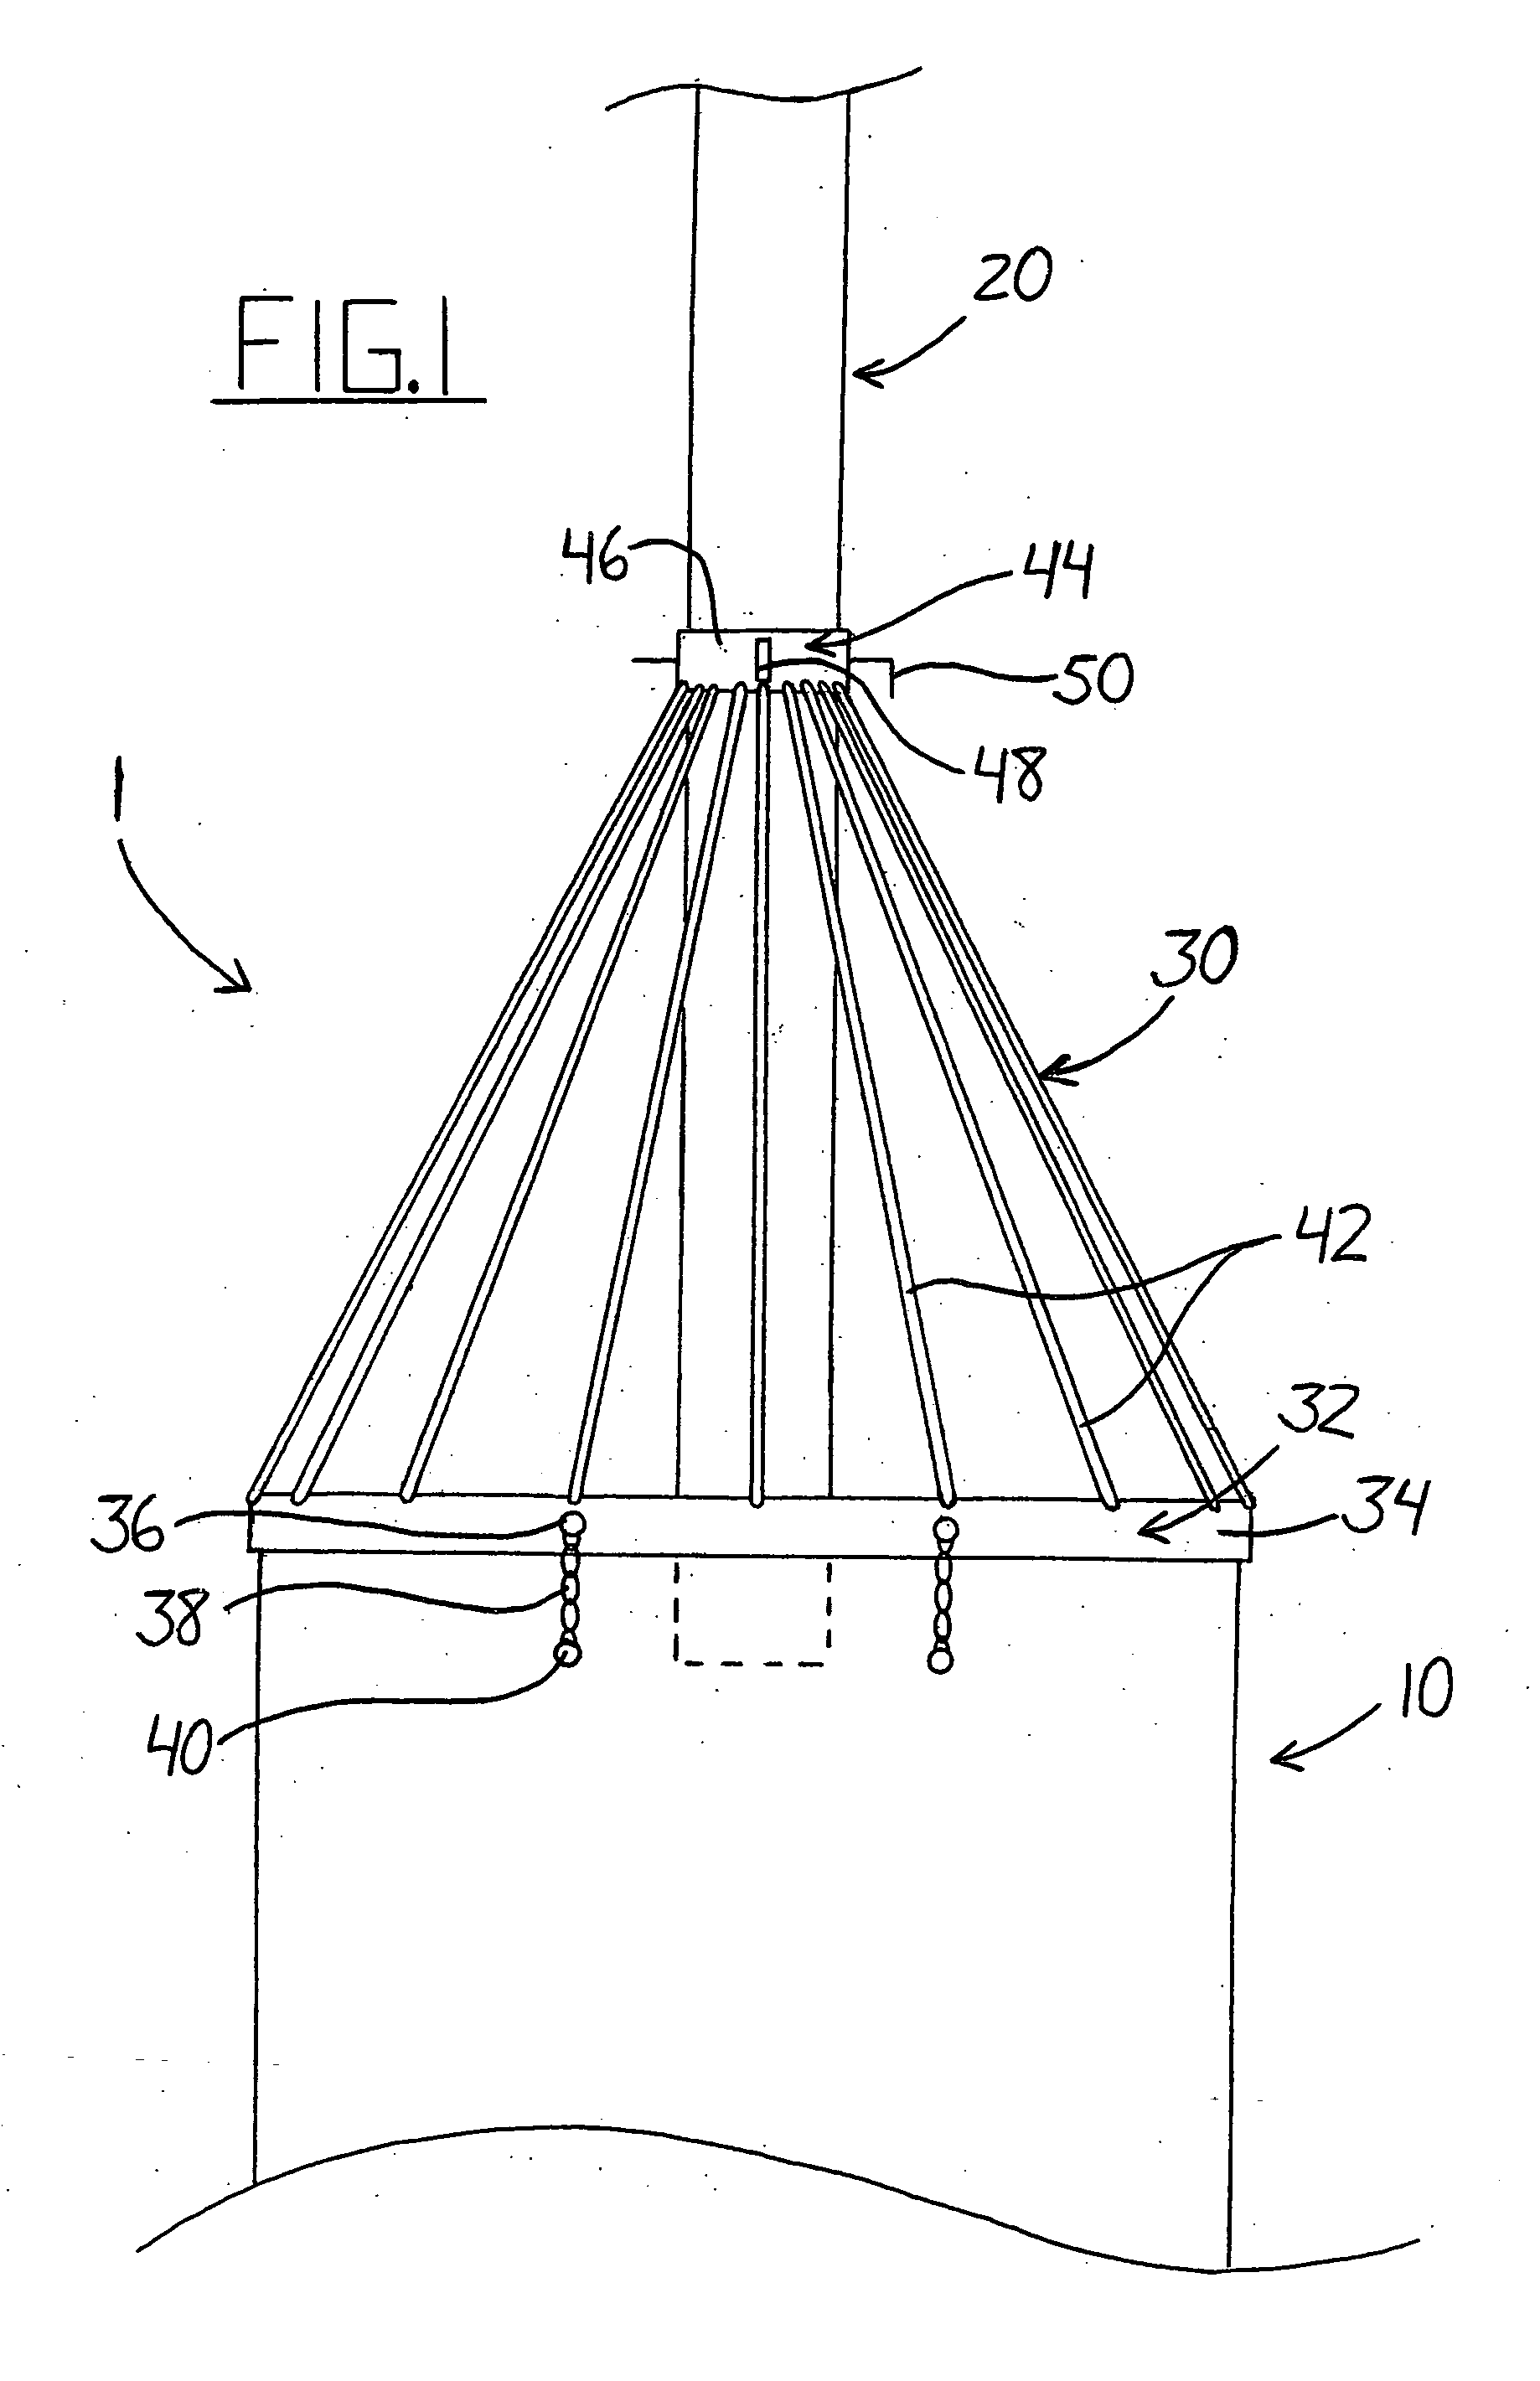 Beaver control device for a culvert pipe